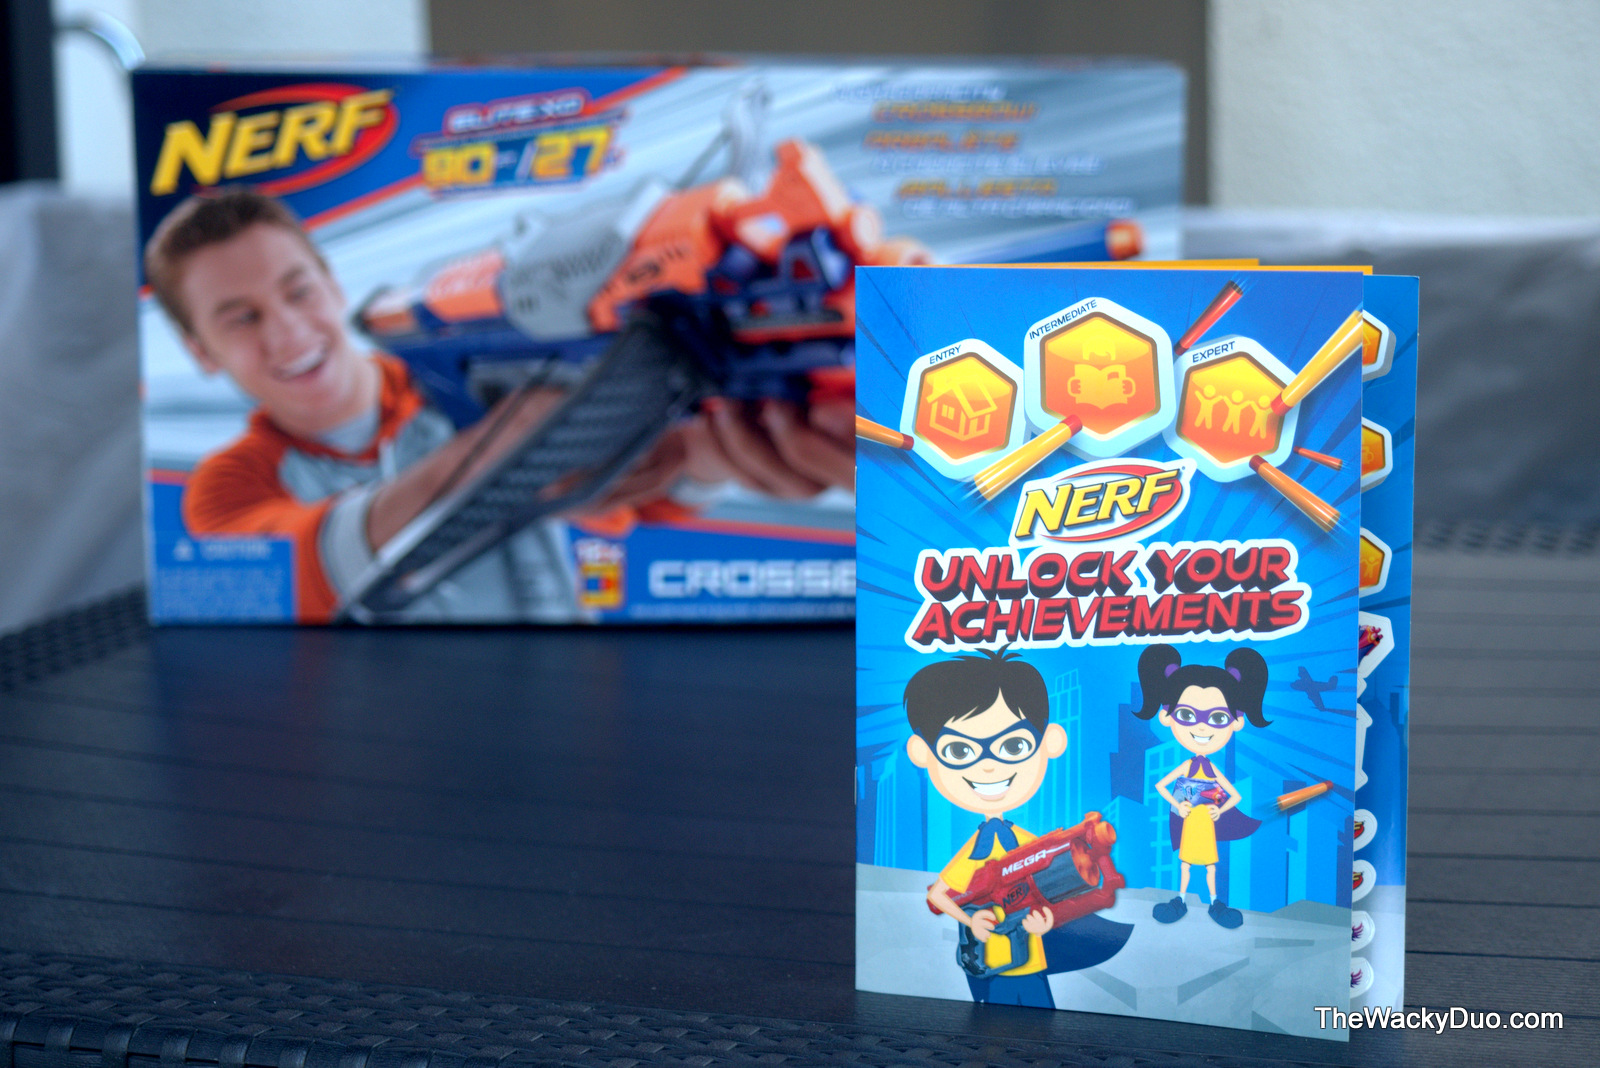 Unlock your Achievements with NERF